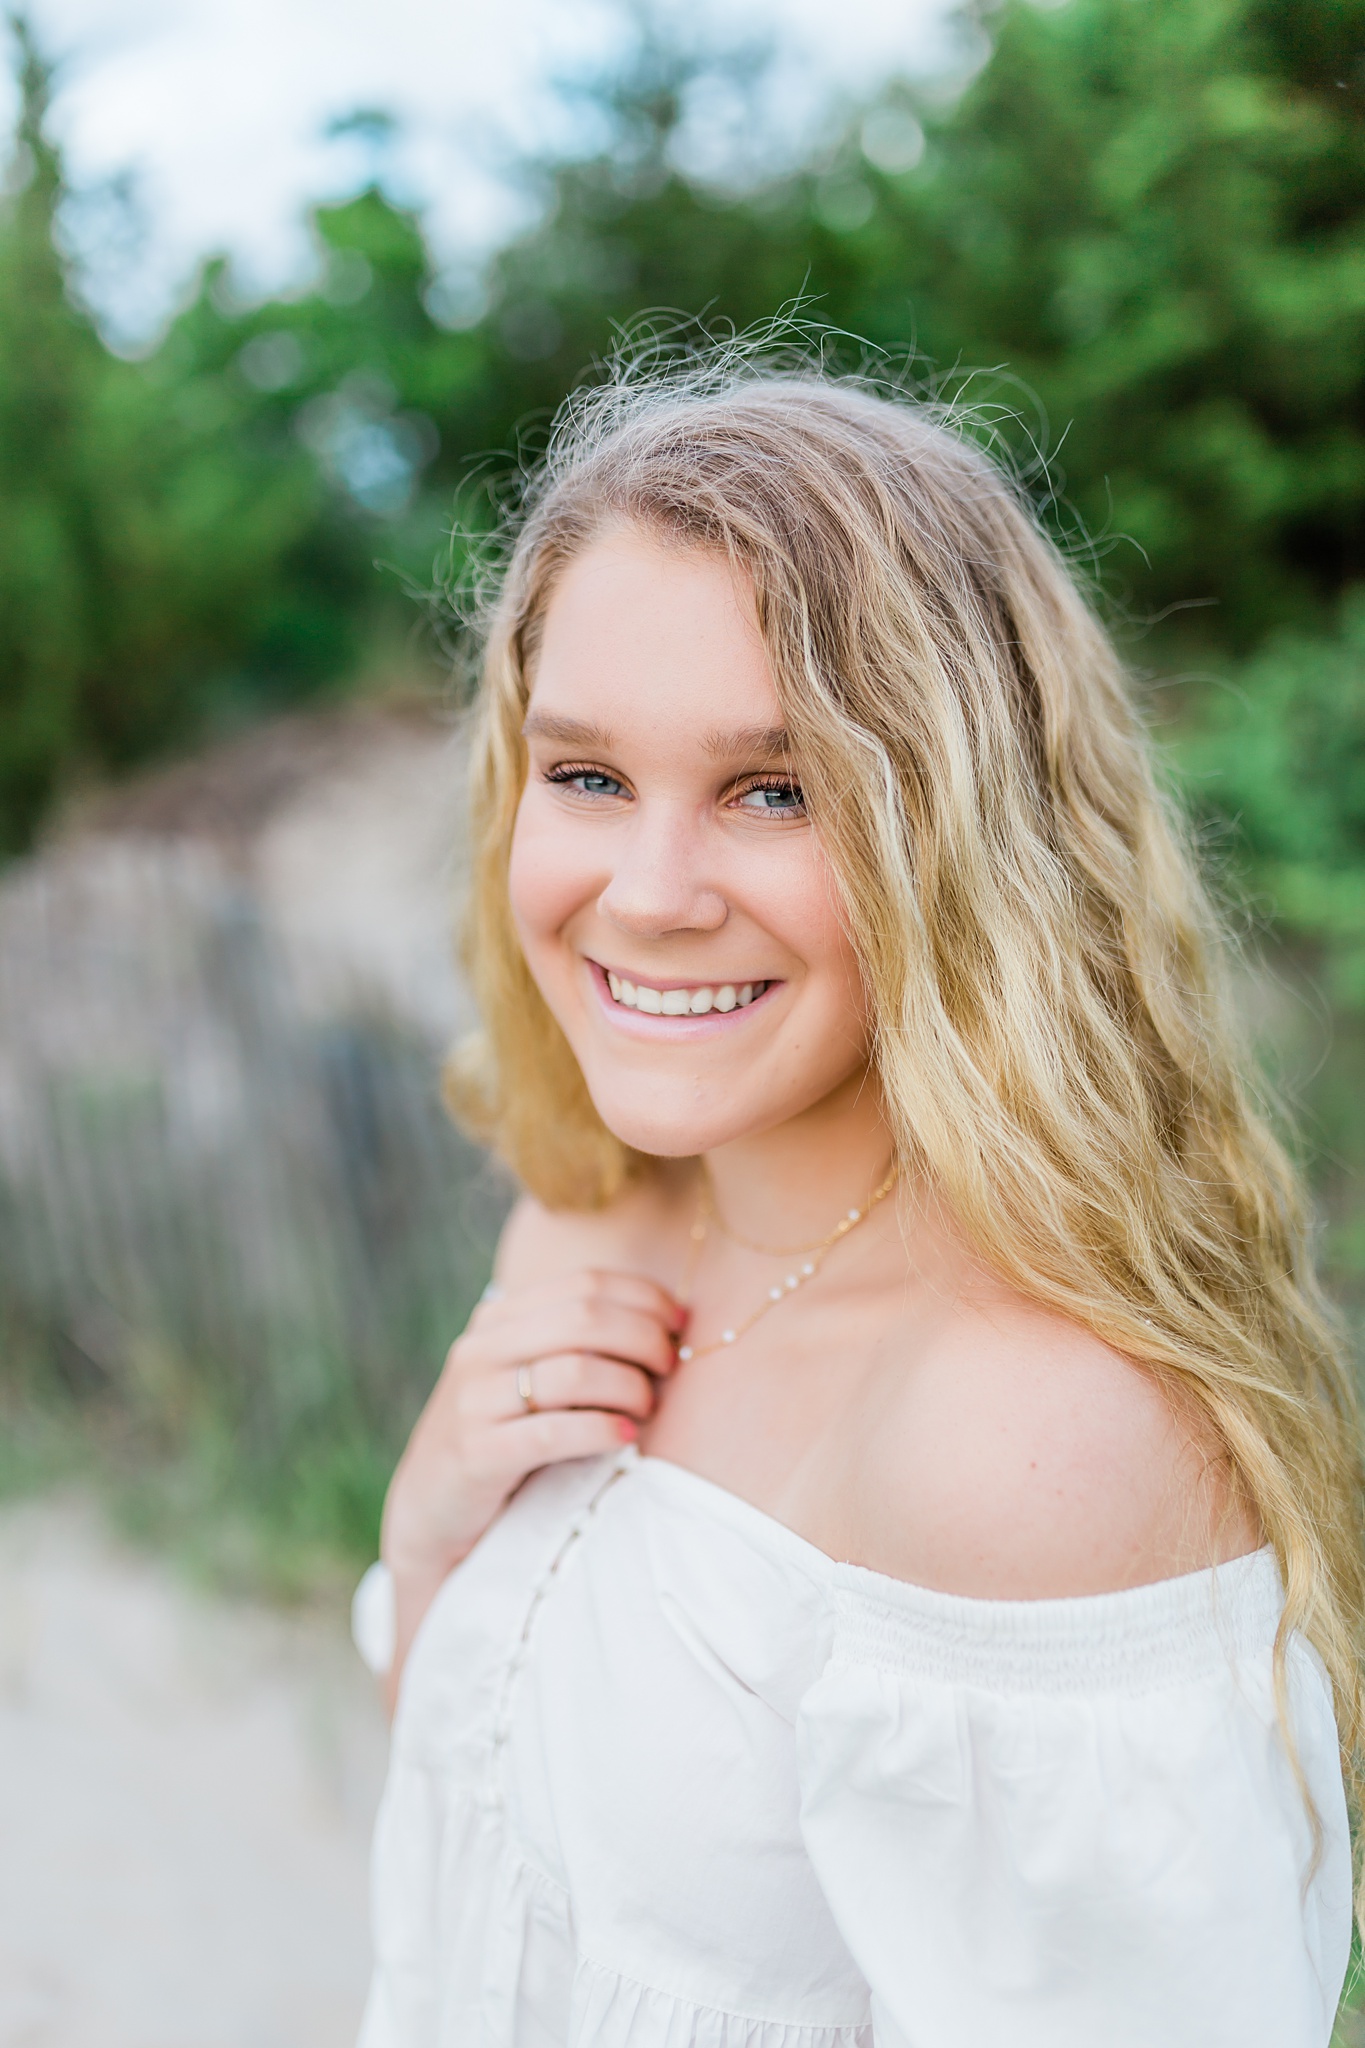 Choosing your outfits for senior photos - nicole-marie.co